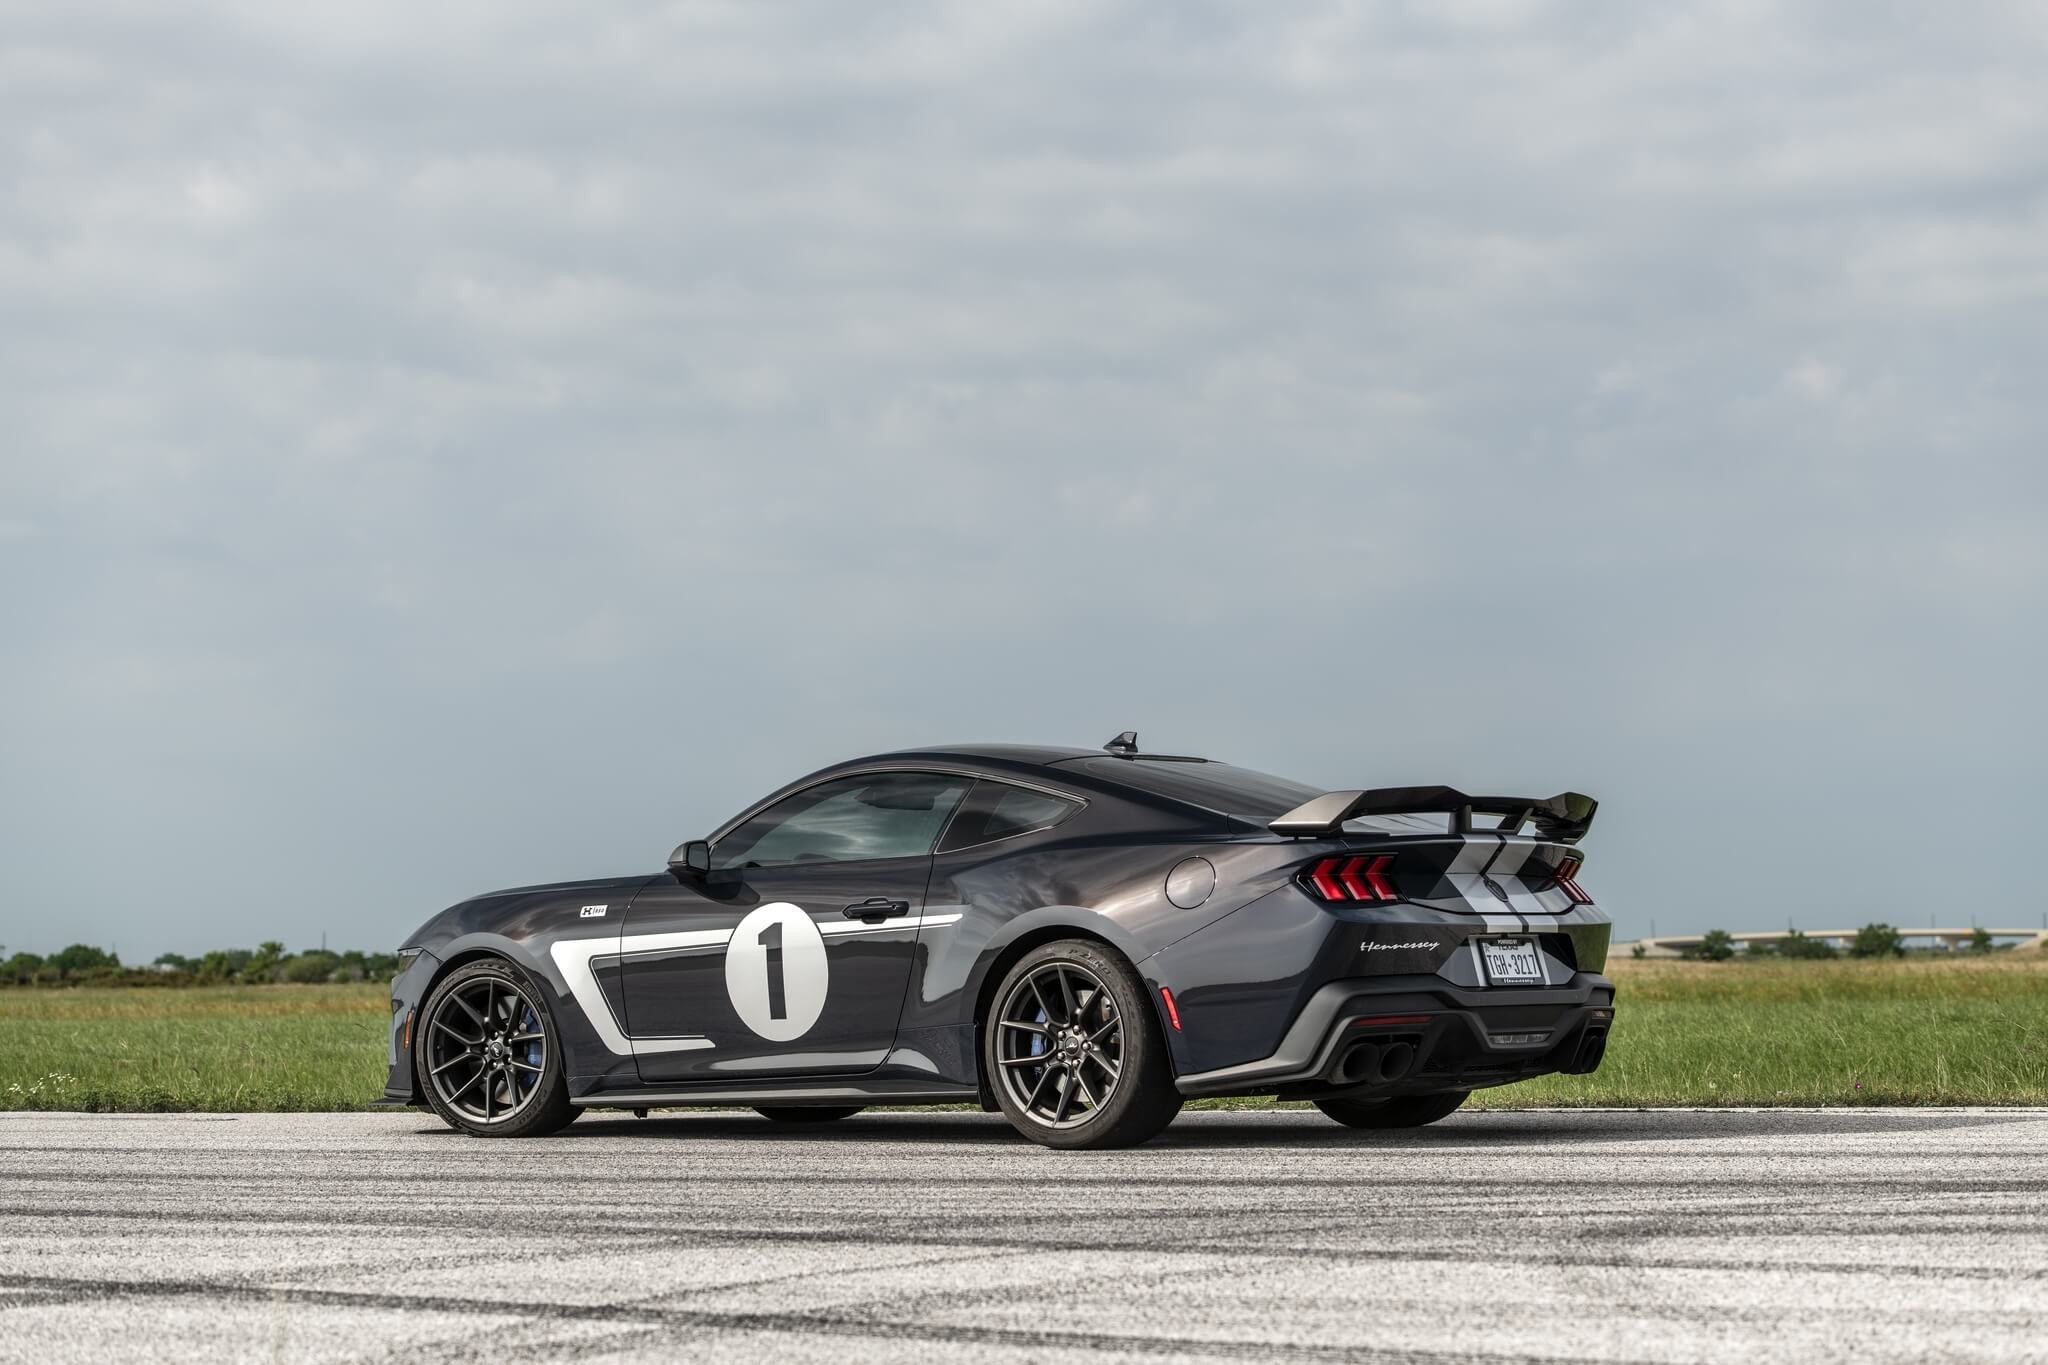 Atelier Hennessey presented an 850-horsepower version of the iconic Ford Mustang coupe